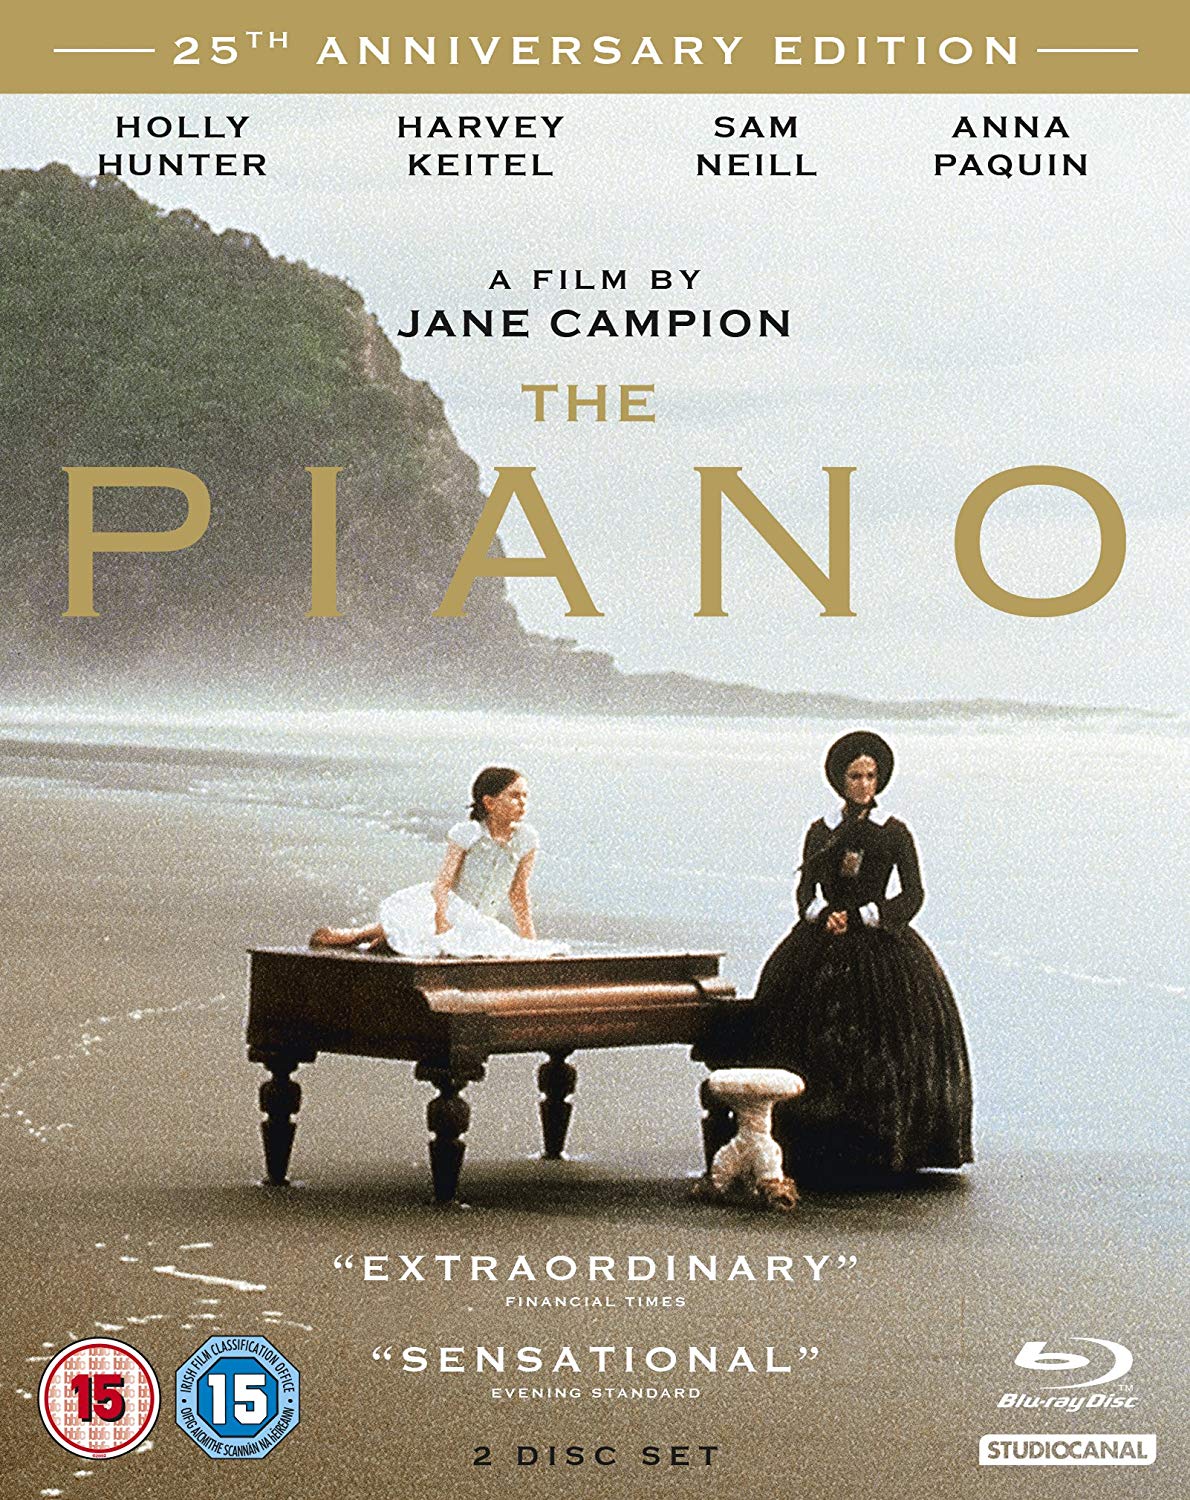 boom competitions - win The Piano on Blu-ray